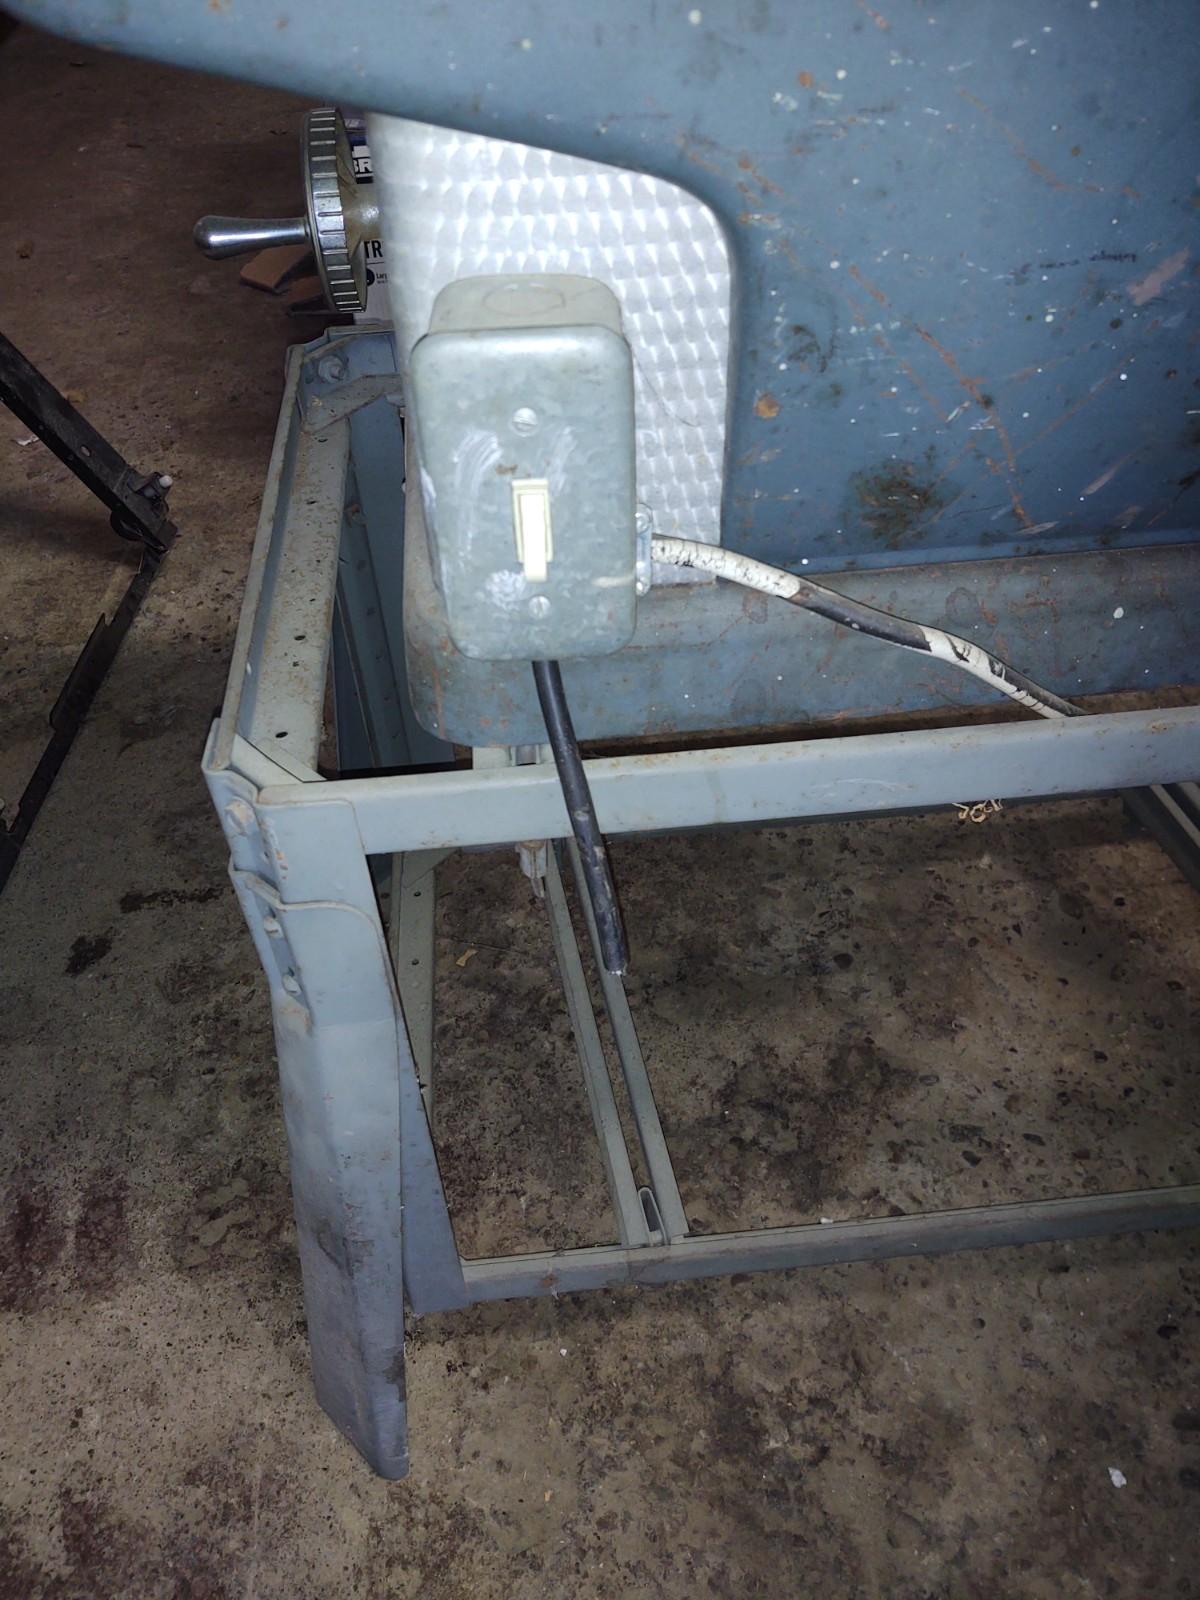 CRAFTSMAN TABLE SAW, WIRE CUT (NEEDS RE-WIRED) - PICK UP ONLY